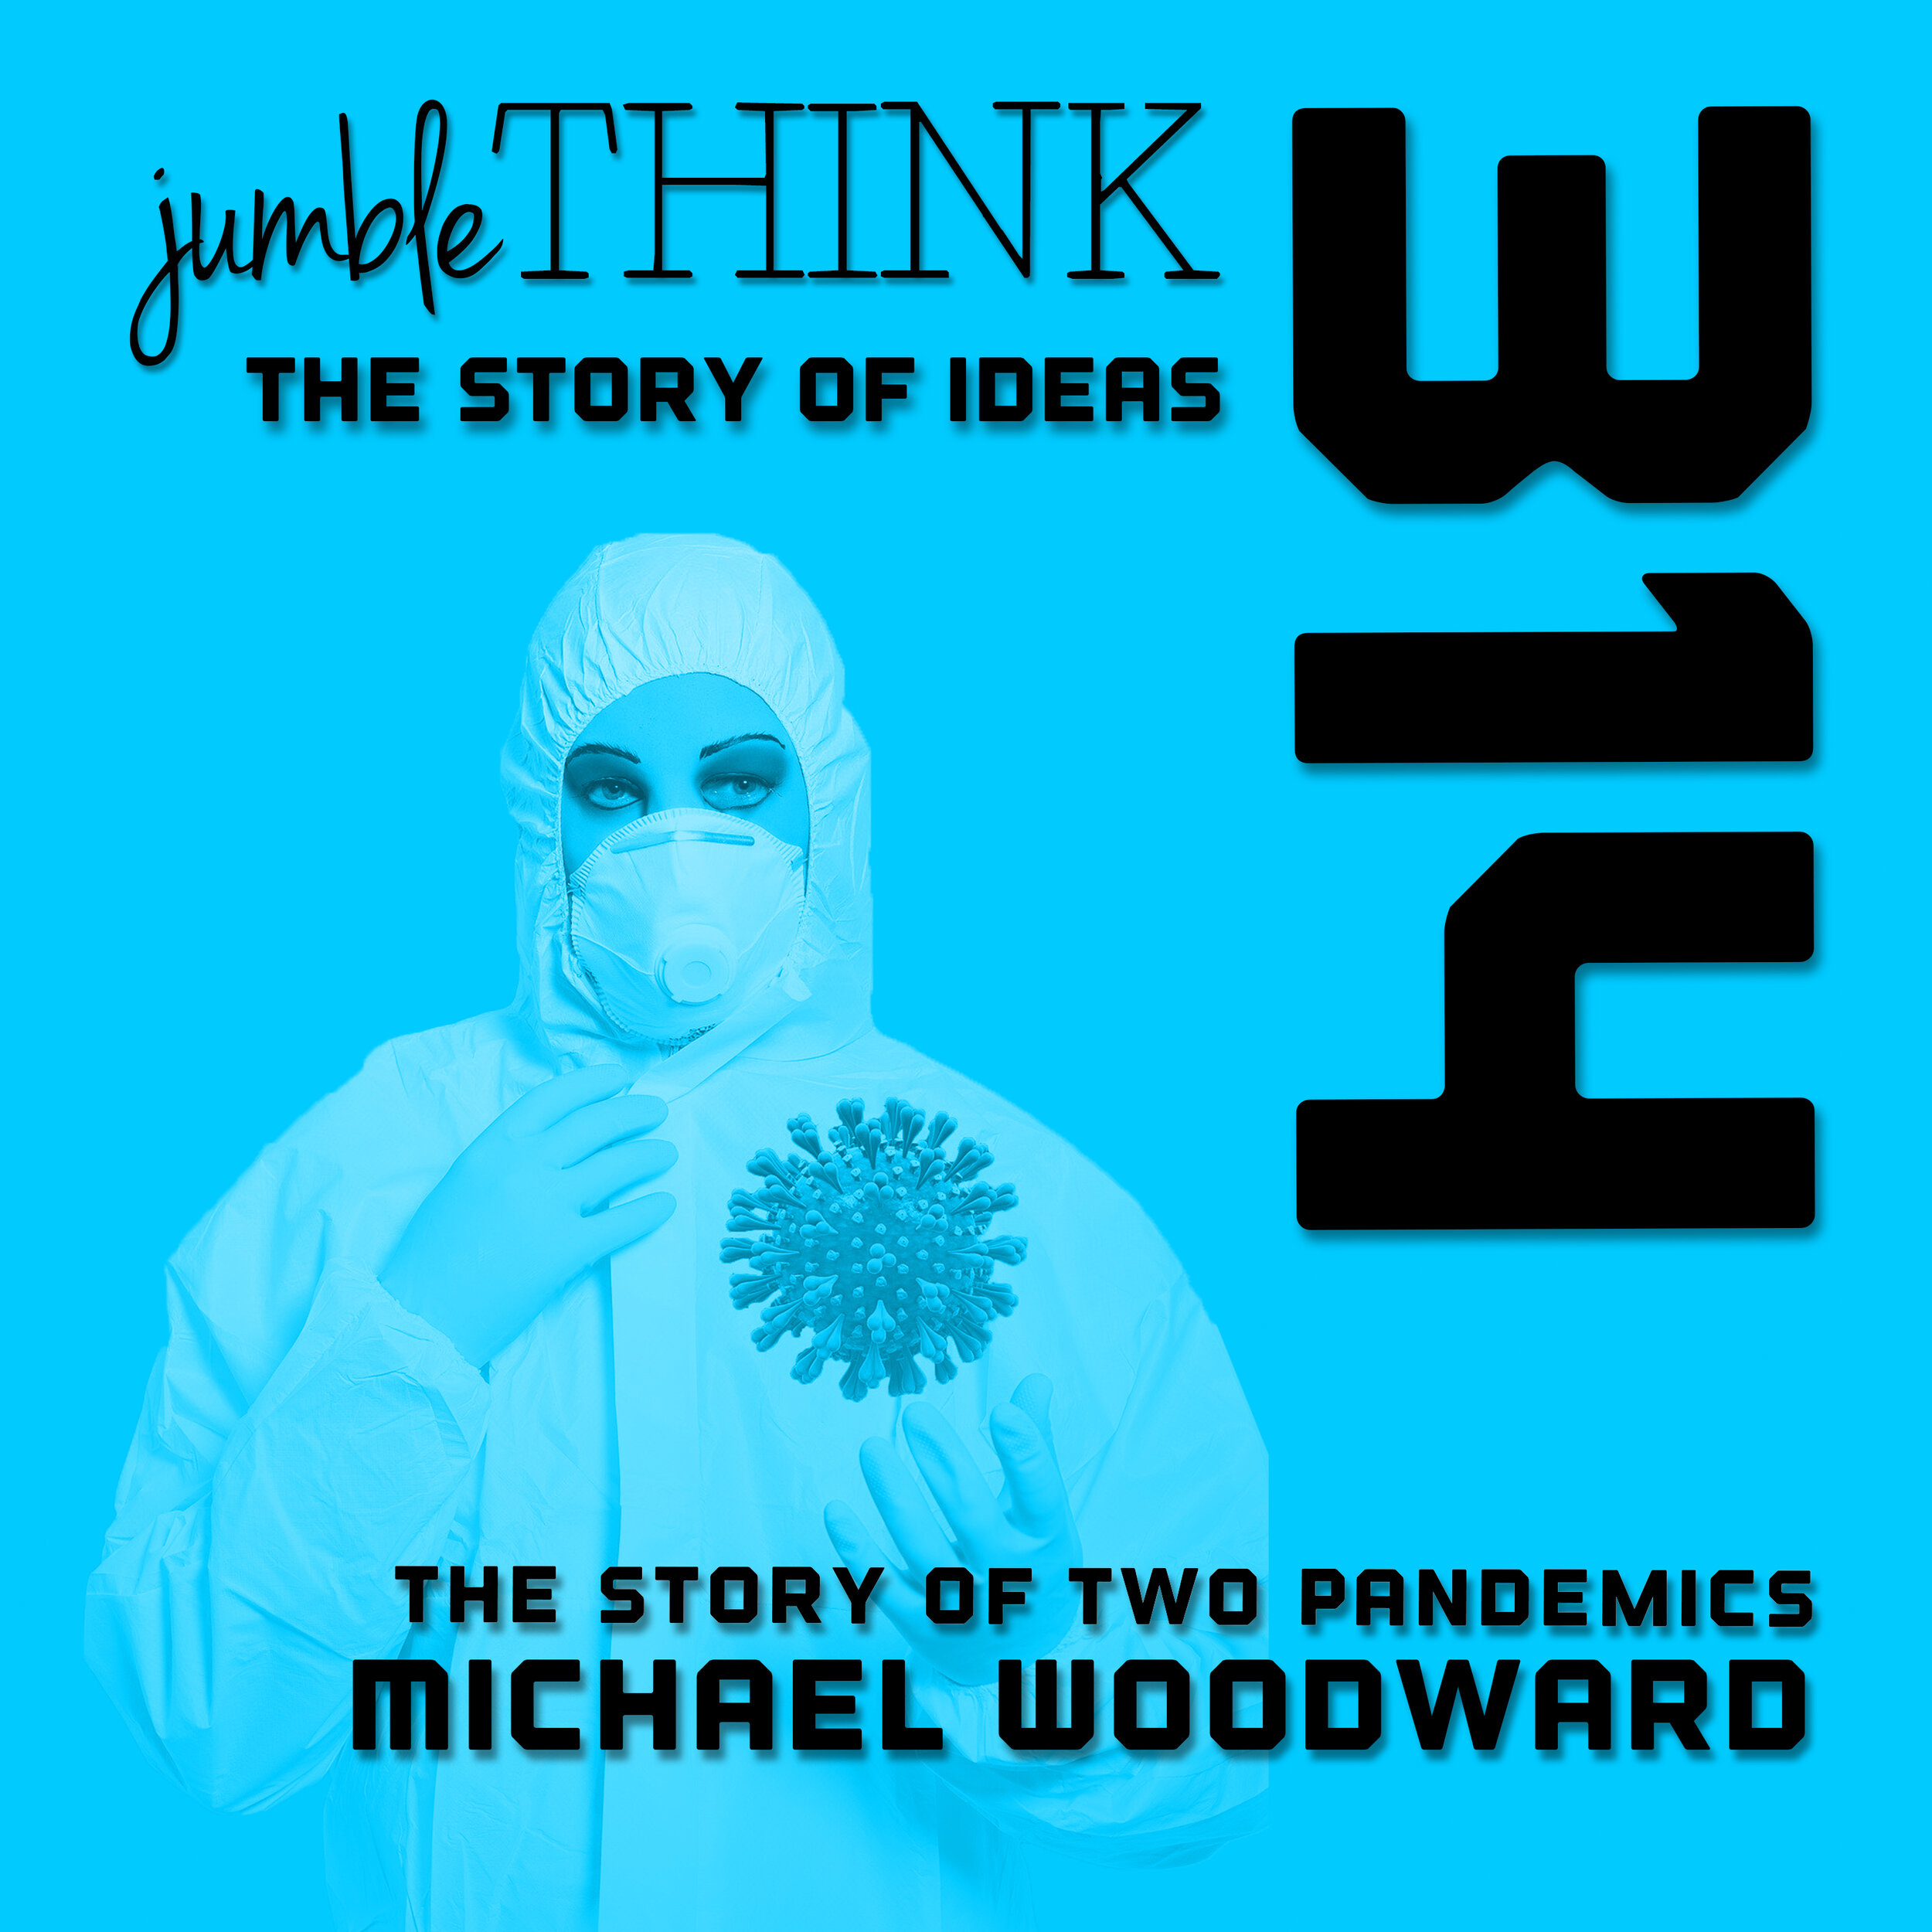 The Story of Two Pandemics